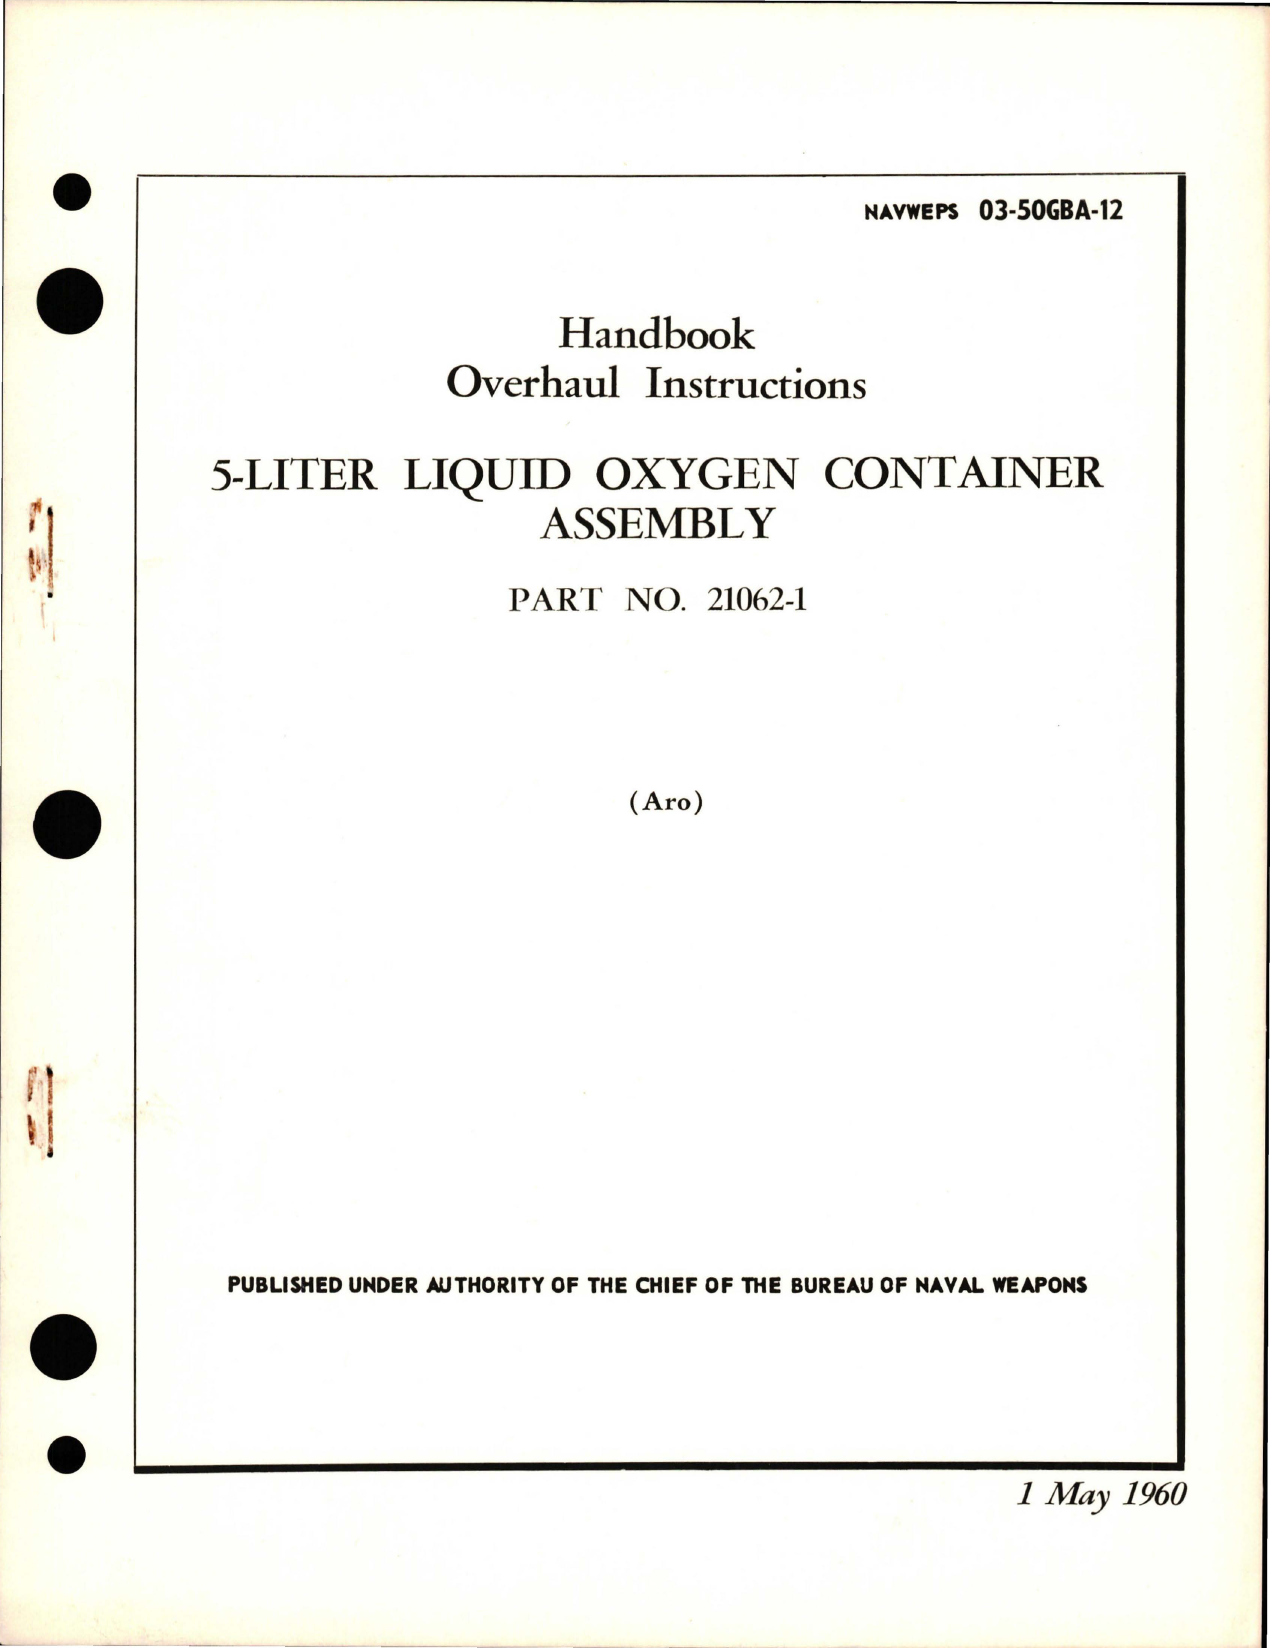 Sample page 1 from AirCorps Library document: Overhaul Instructions for 5-Liter Liquid Oxygen Container Assembly - Part 21062-1 